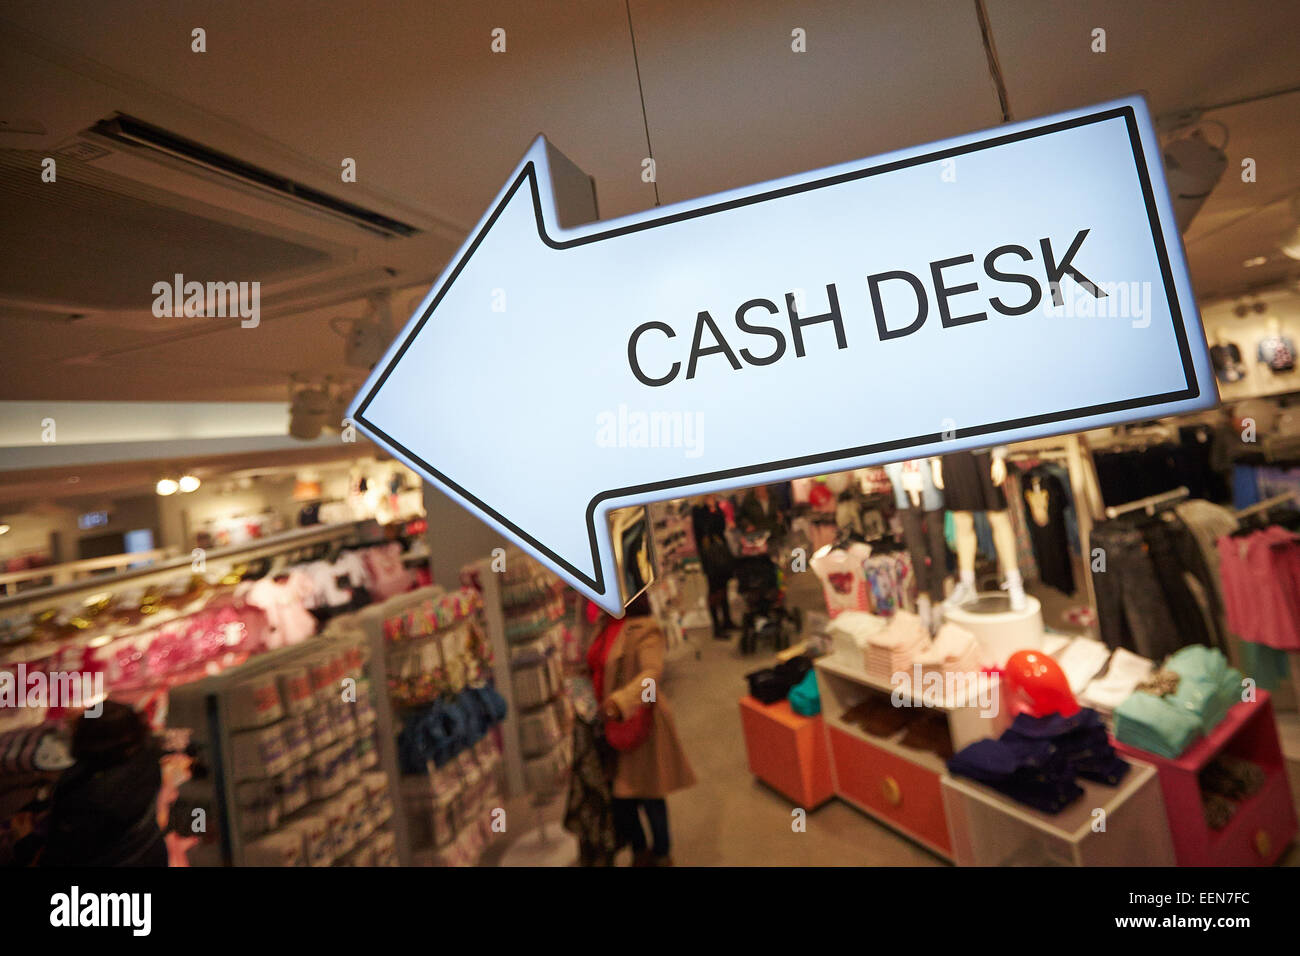 Cash desk sign in a H&M store Stock Photo - Alamy